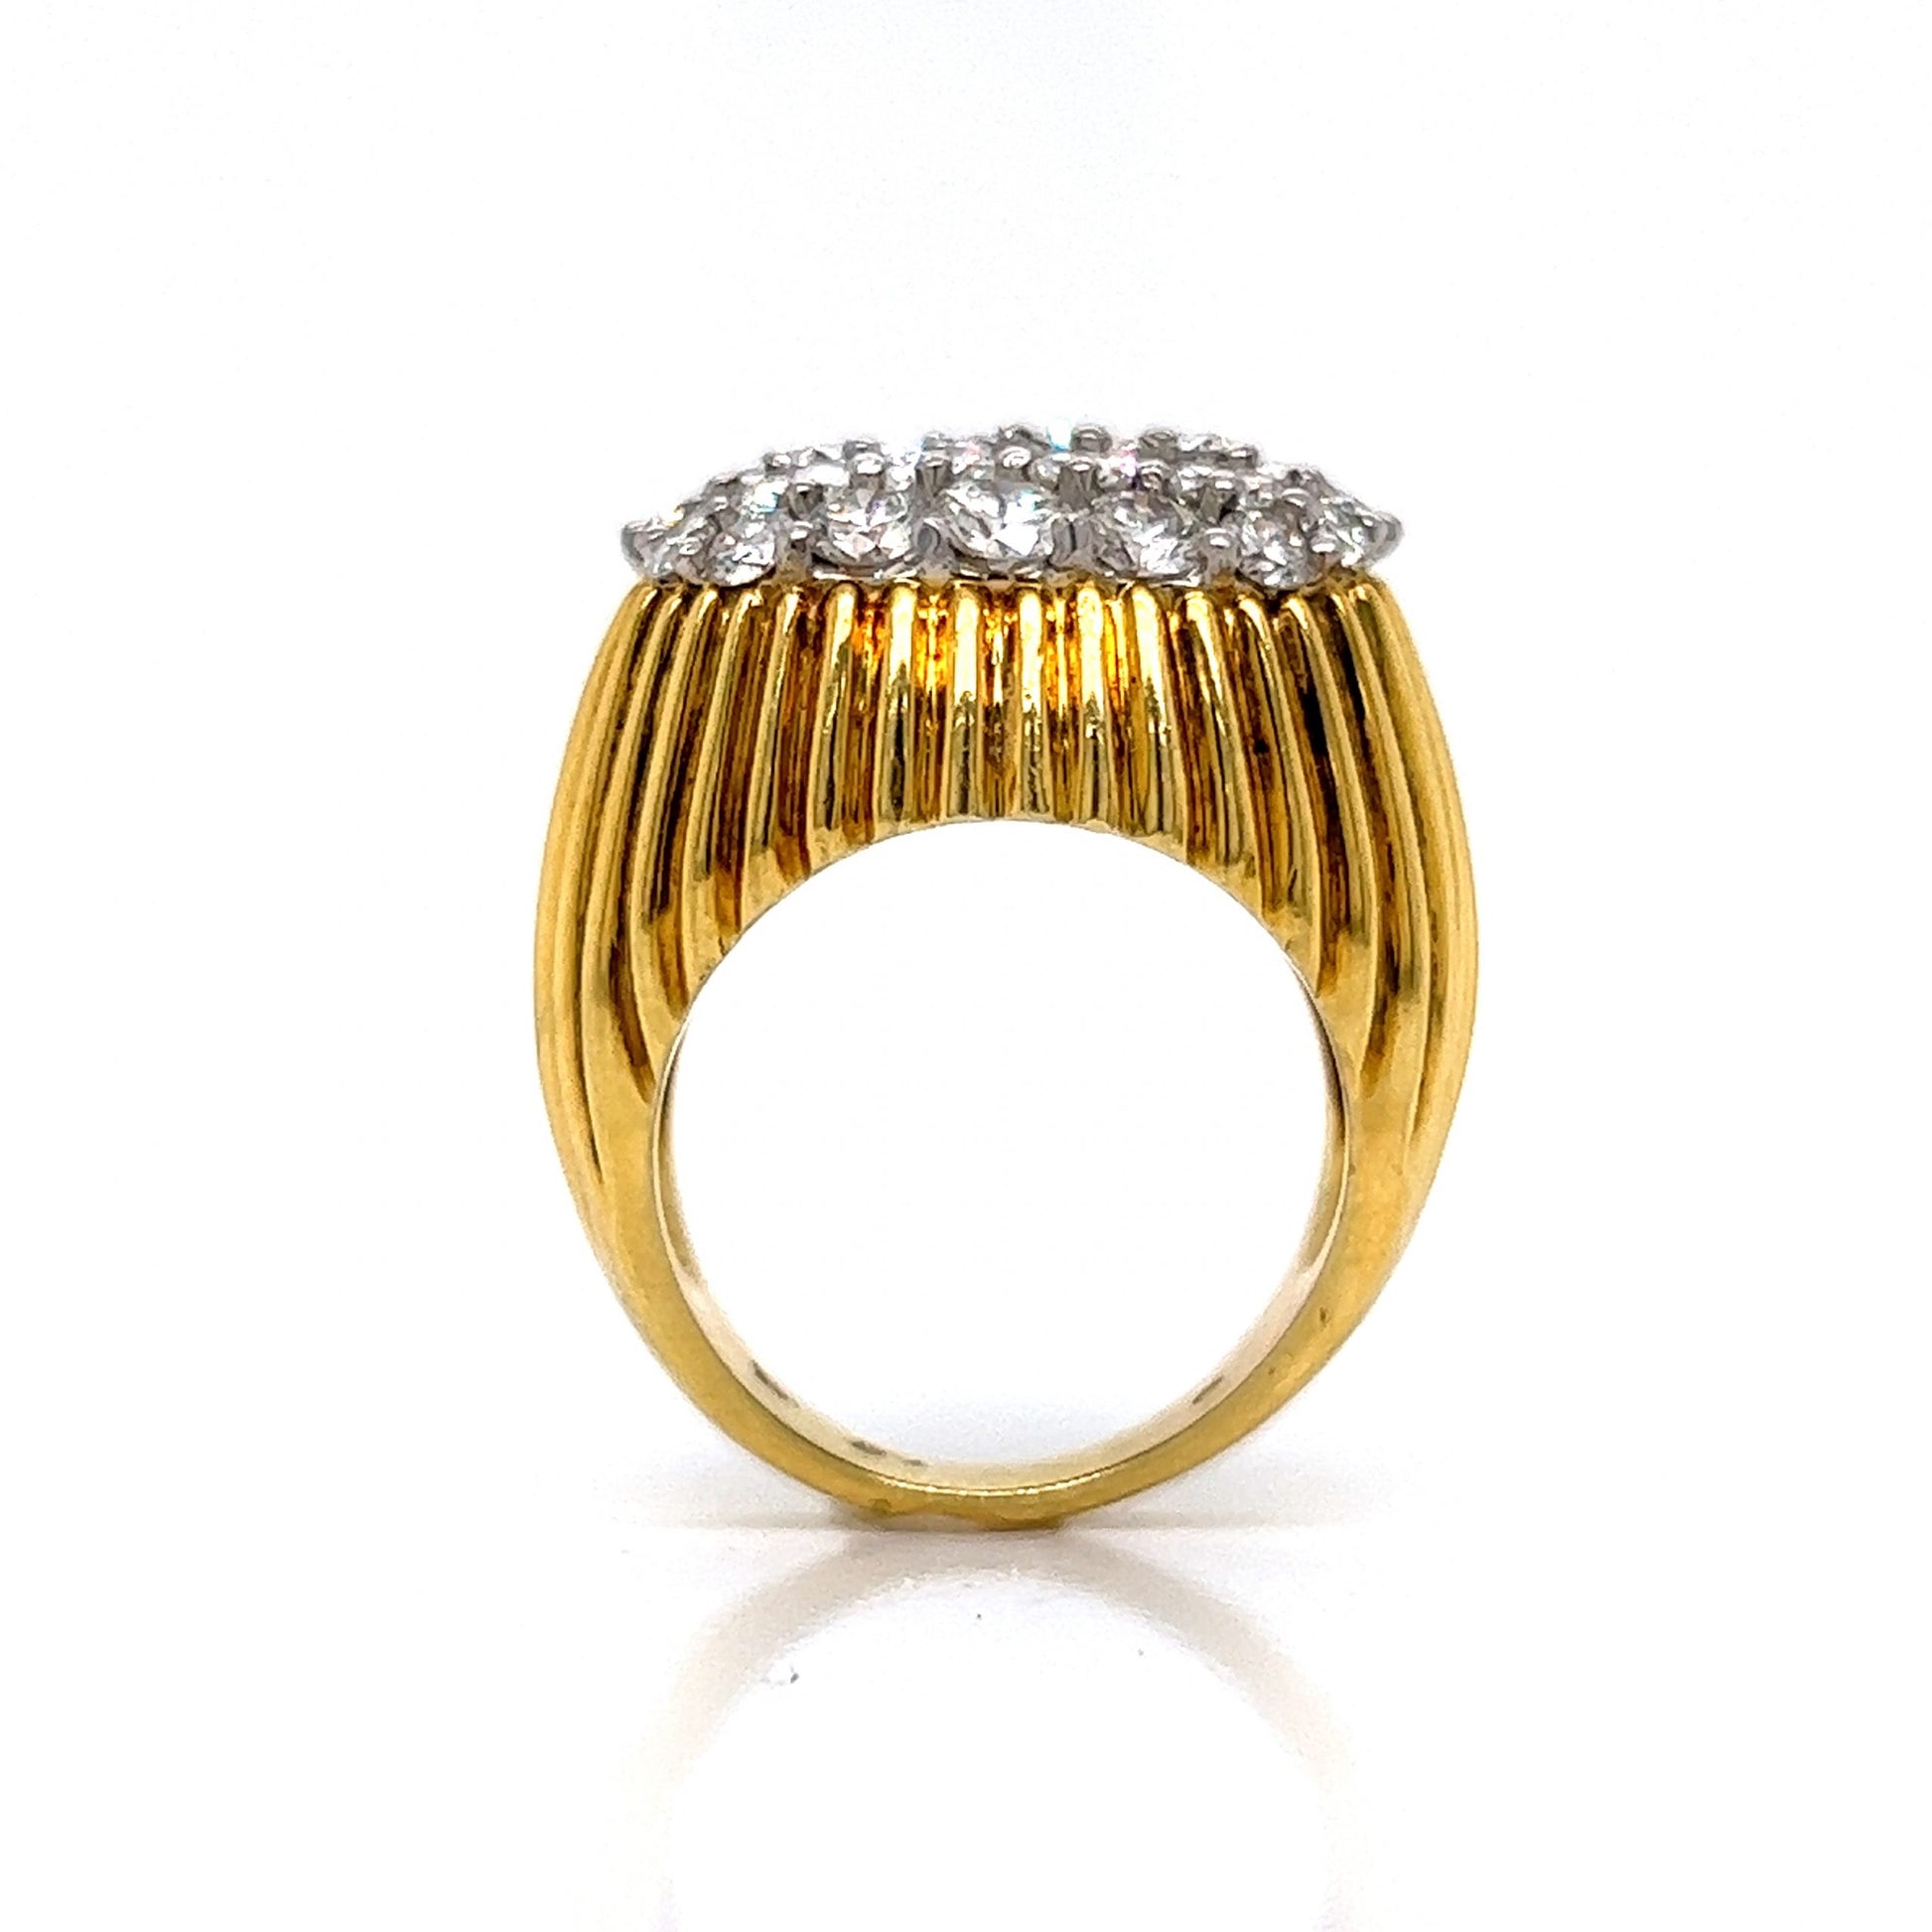 Oval Shaped Diamond Textured Cocktail Ring in 18k & Platinum